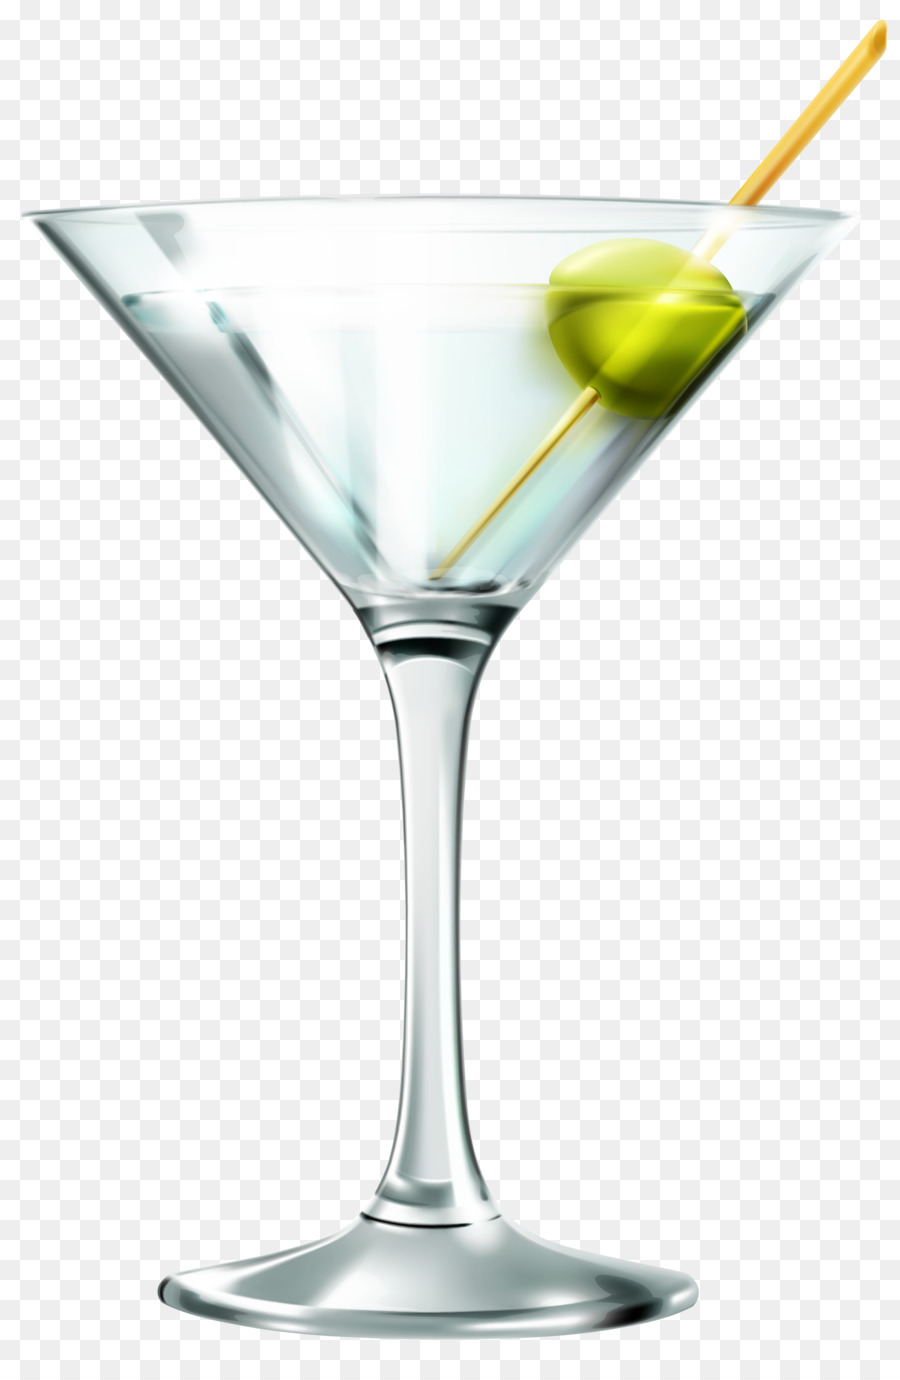 Cocktail glass Martini Cup - Martini Glass Cliparts png download - 2634*4000 - Free Transparent Cocktail png Download.